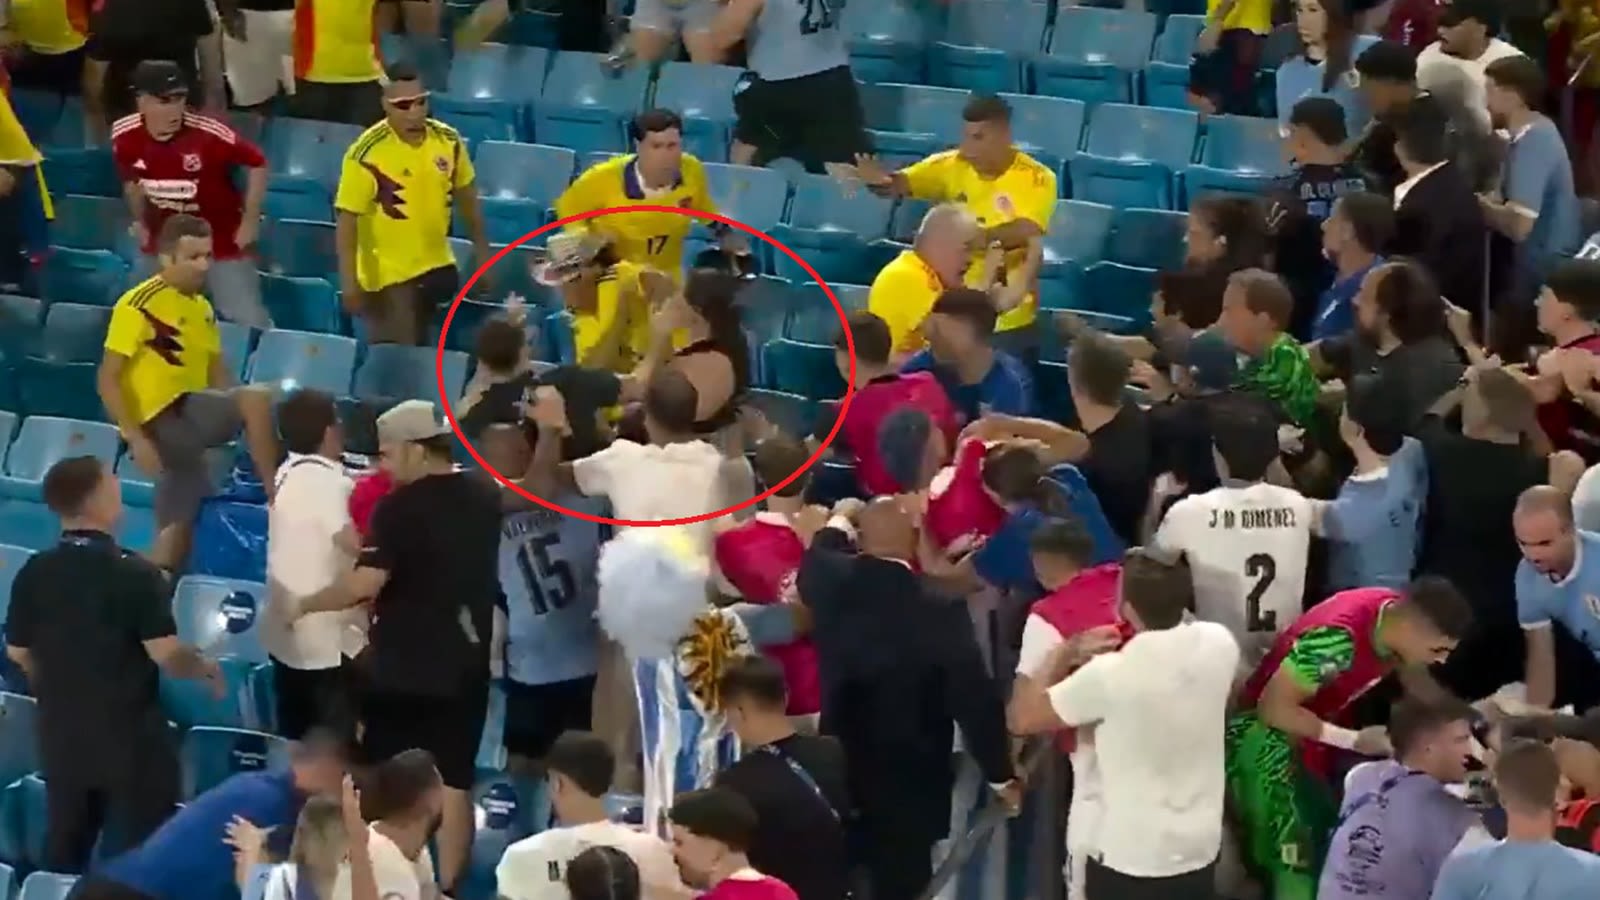 Uruguay players enter stands to fight fans after Copa America loss to Colombia